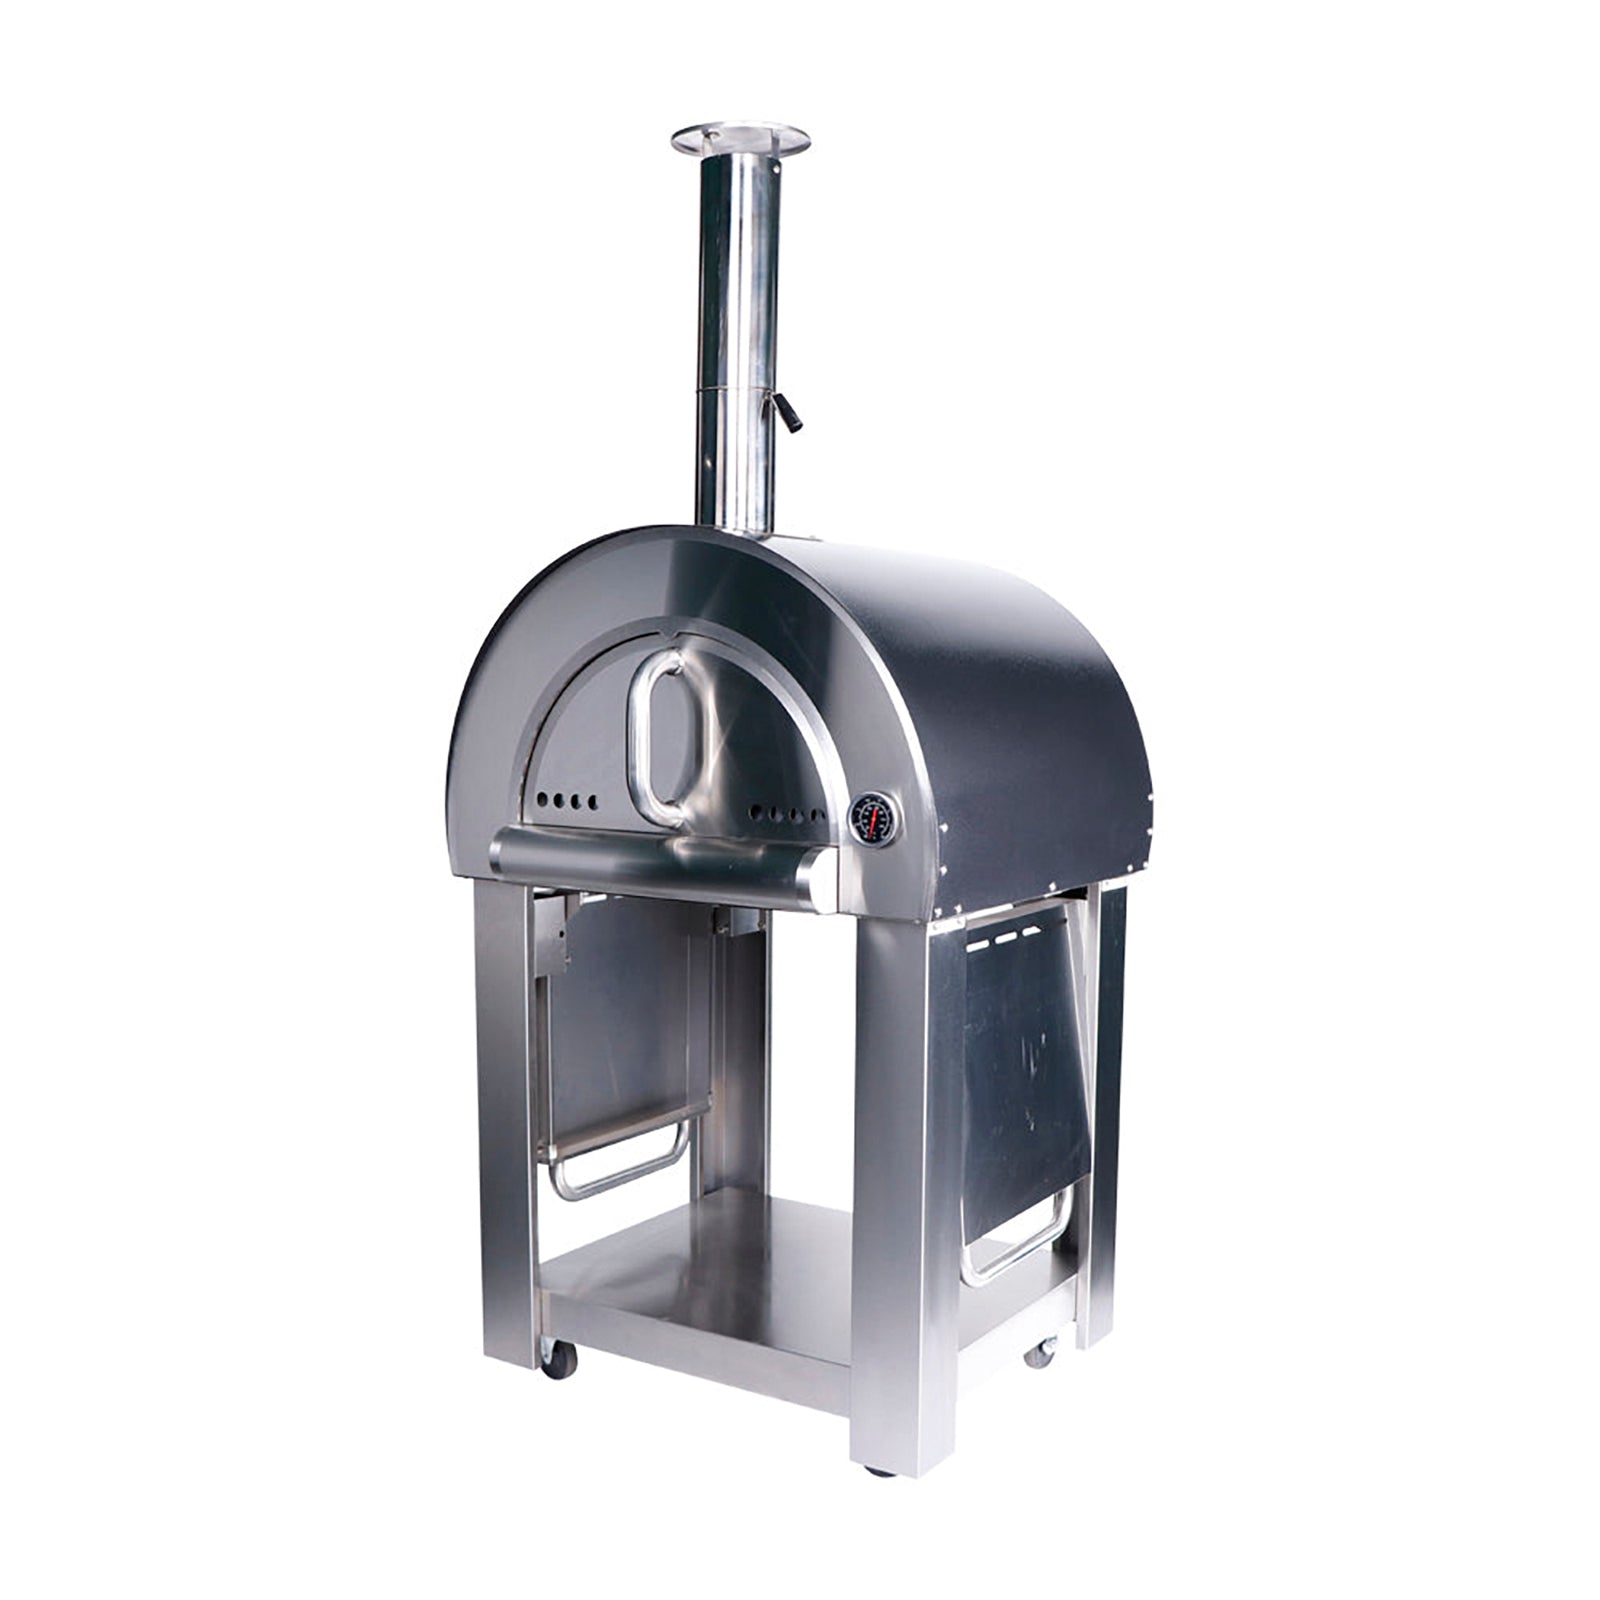 Smart Freestanding Wood Fired Pizza Oven In Black & Stainless Steel Finish